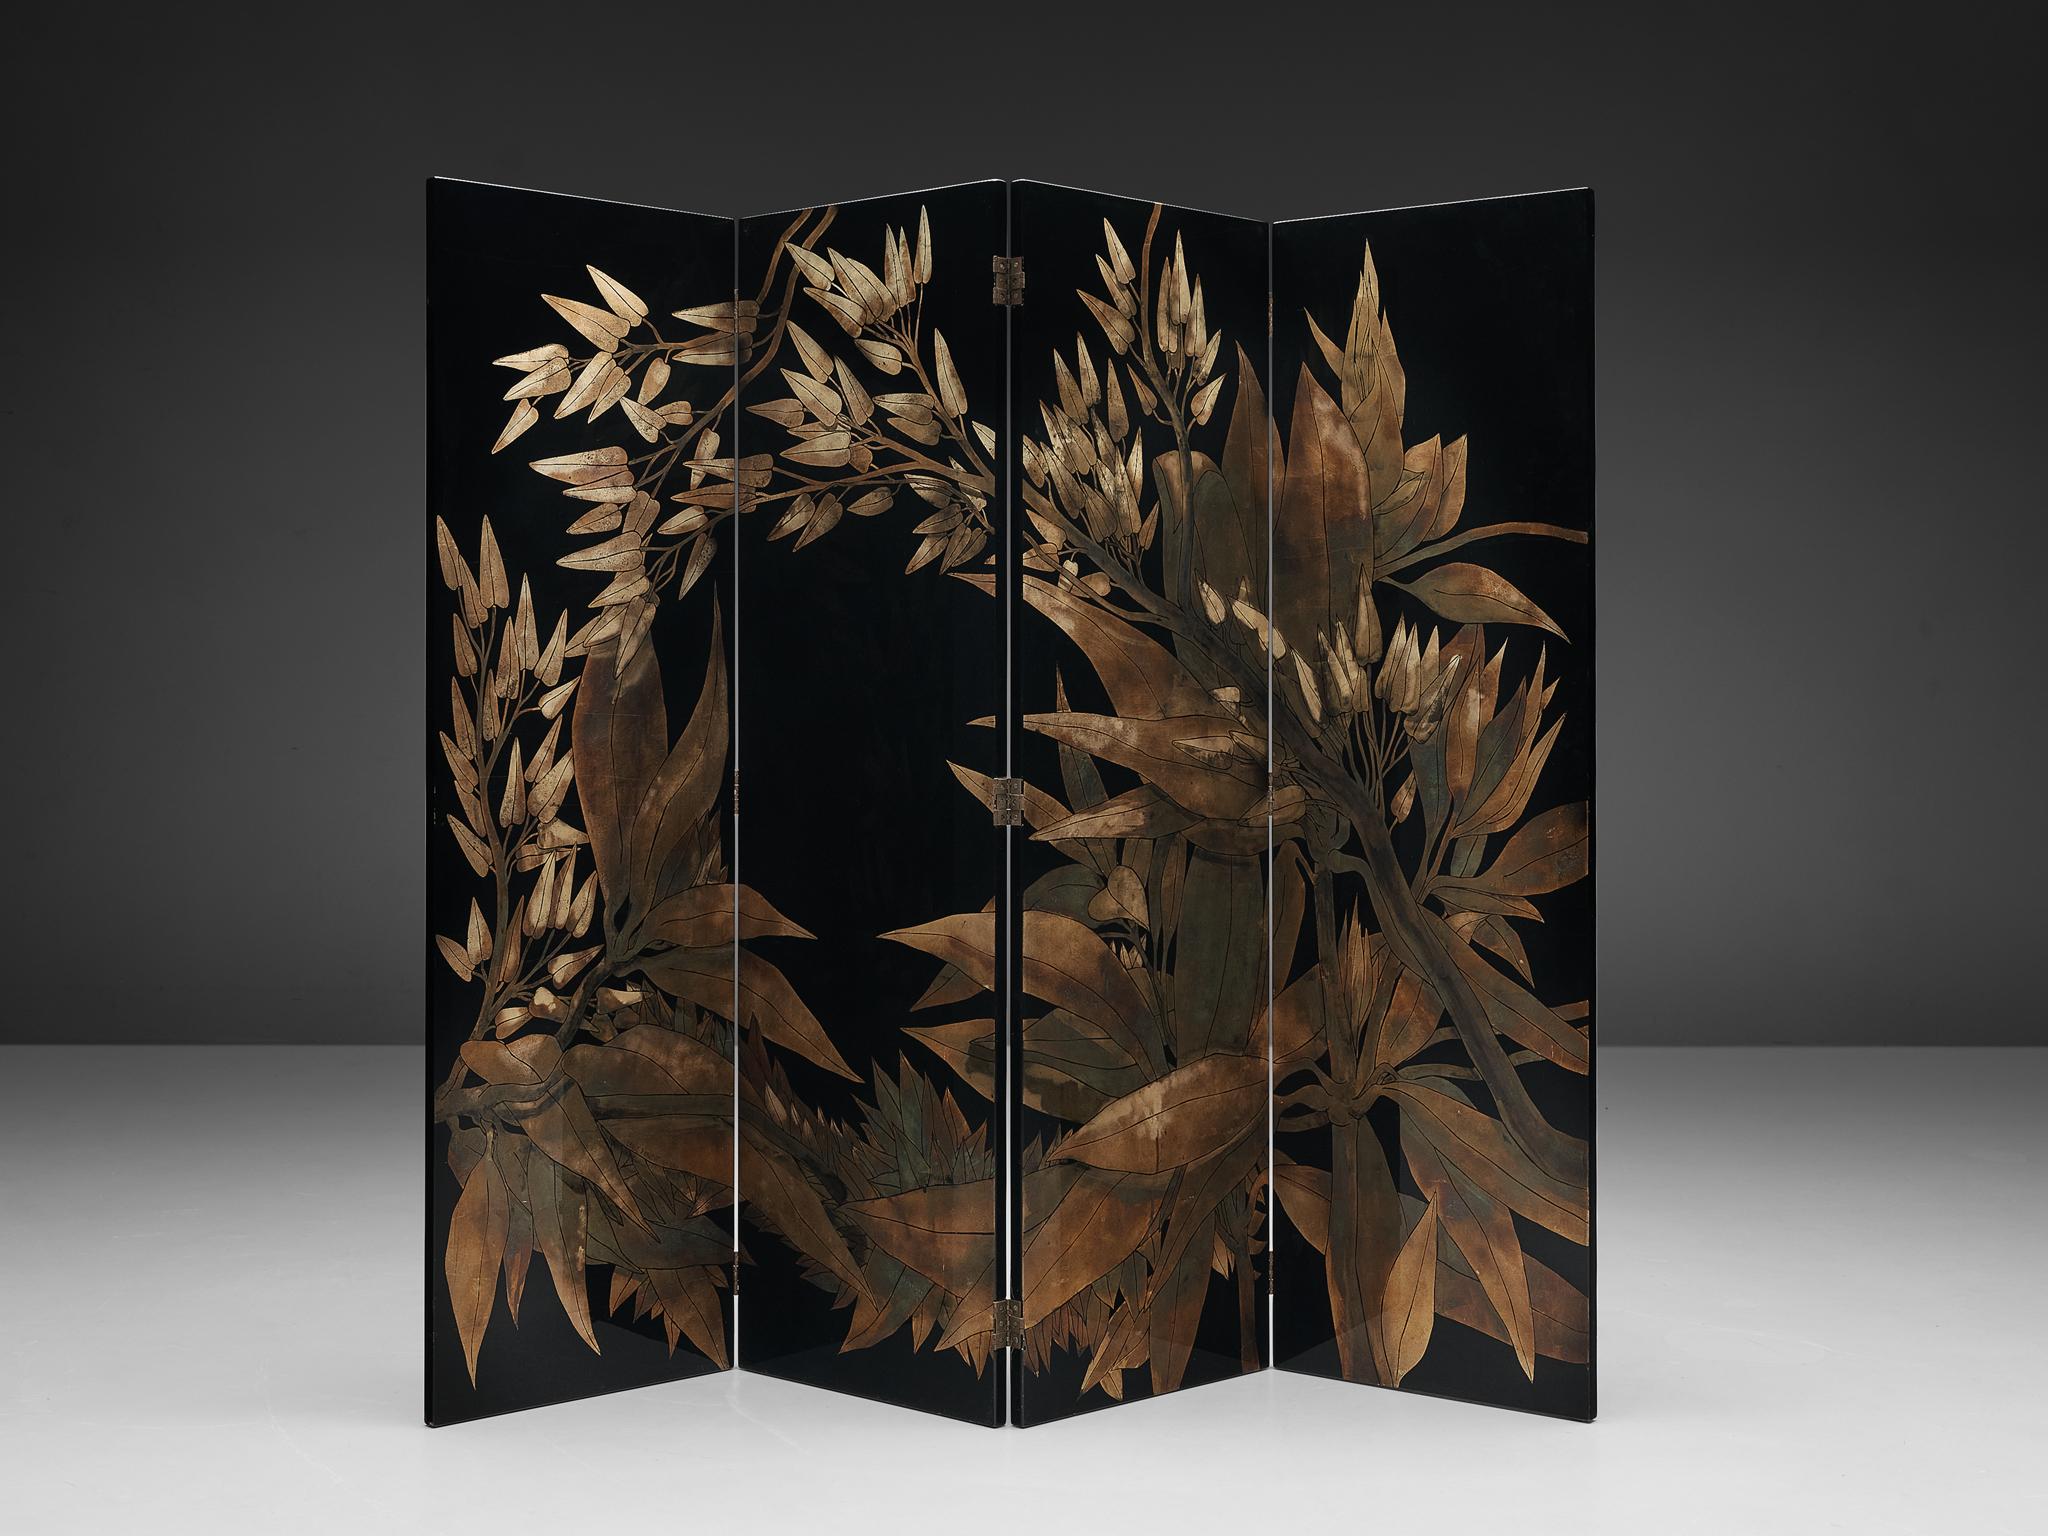 Room divider, 'laque d'argent no. 1060', lacquered wood, etched copper, France, 1970s

This French room divider shows many sources of inspiration: the ever impressing French Art Deco period of the 1920 and 1930s, but also more historic and